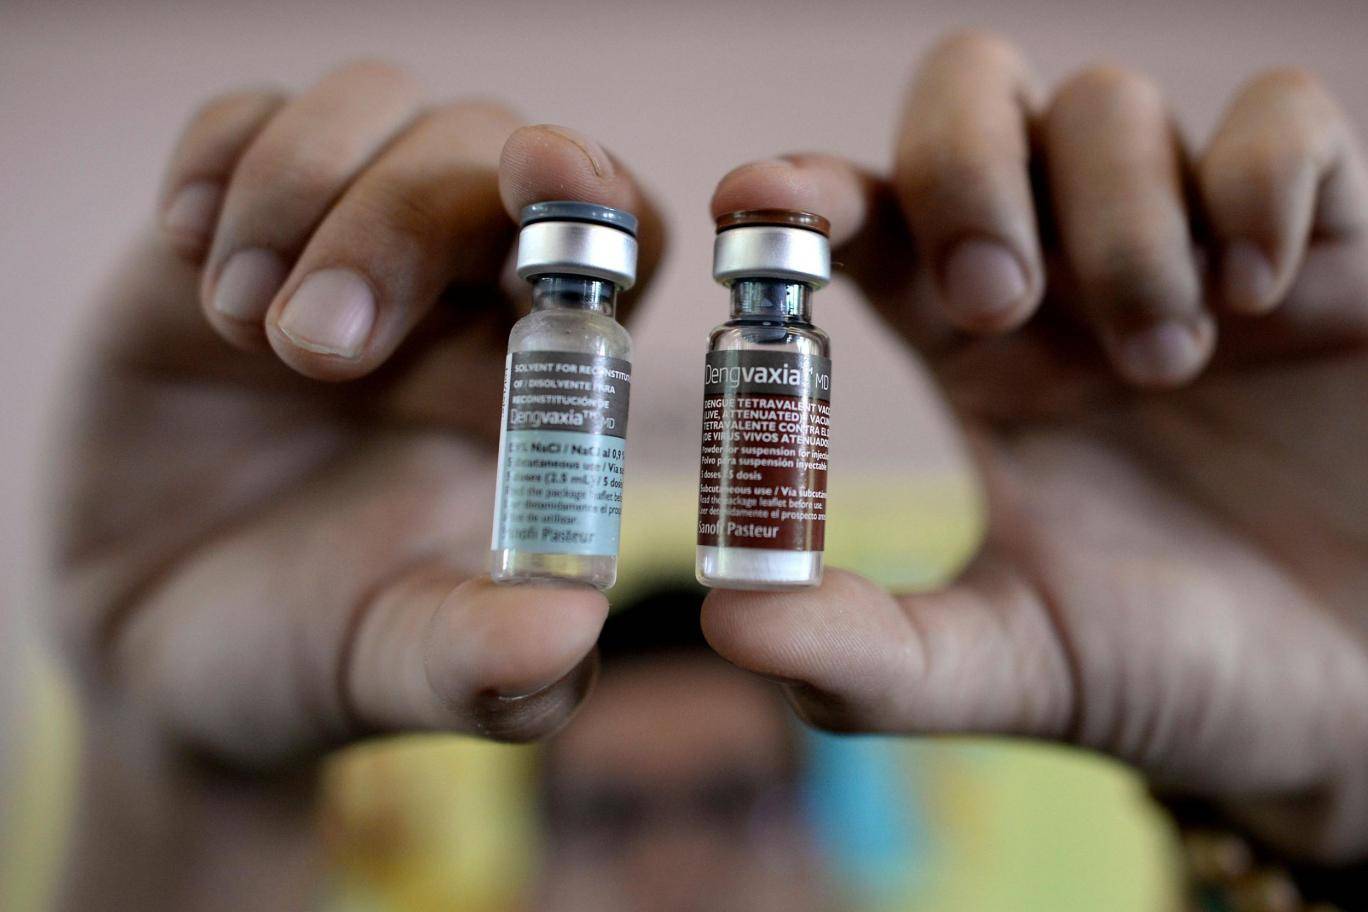 Ministry of Health Warns Malaysians Against Dangers of New Dengue Vaccine - WORLD OF BUZZ 2